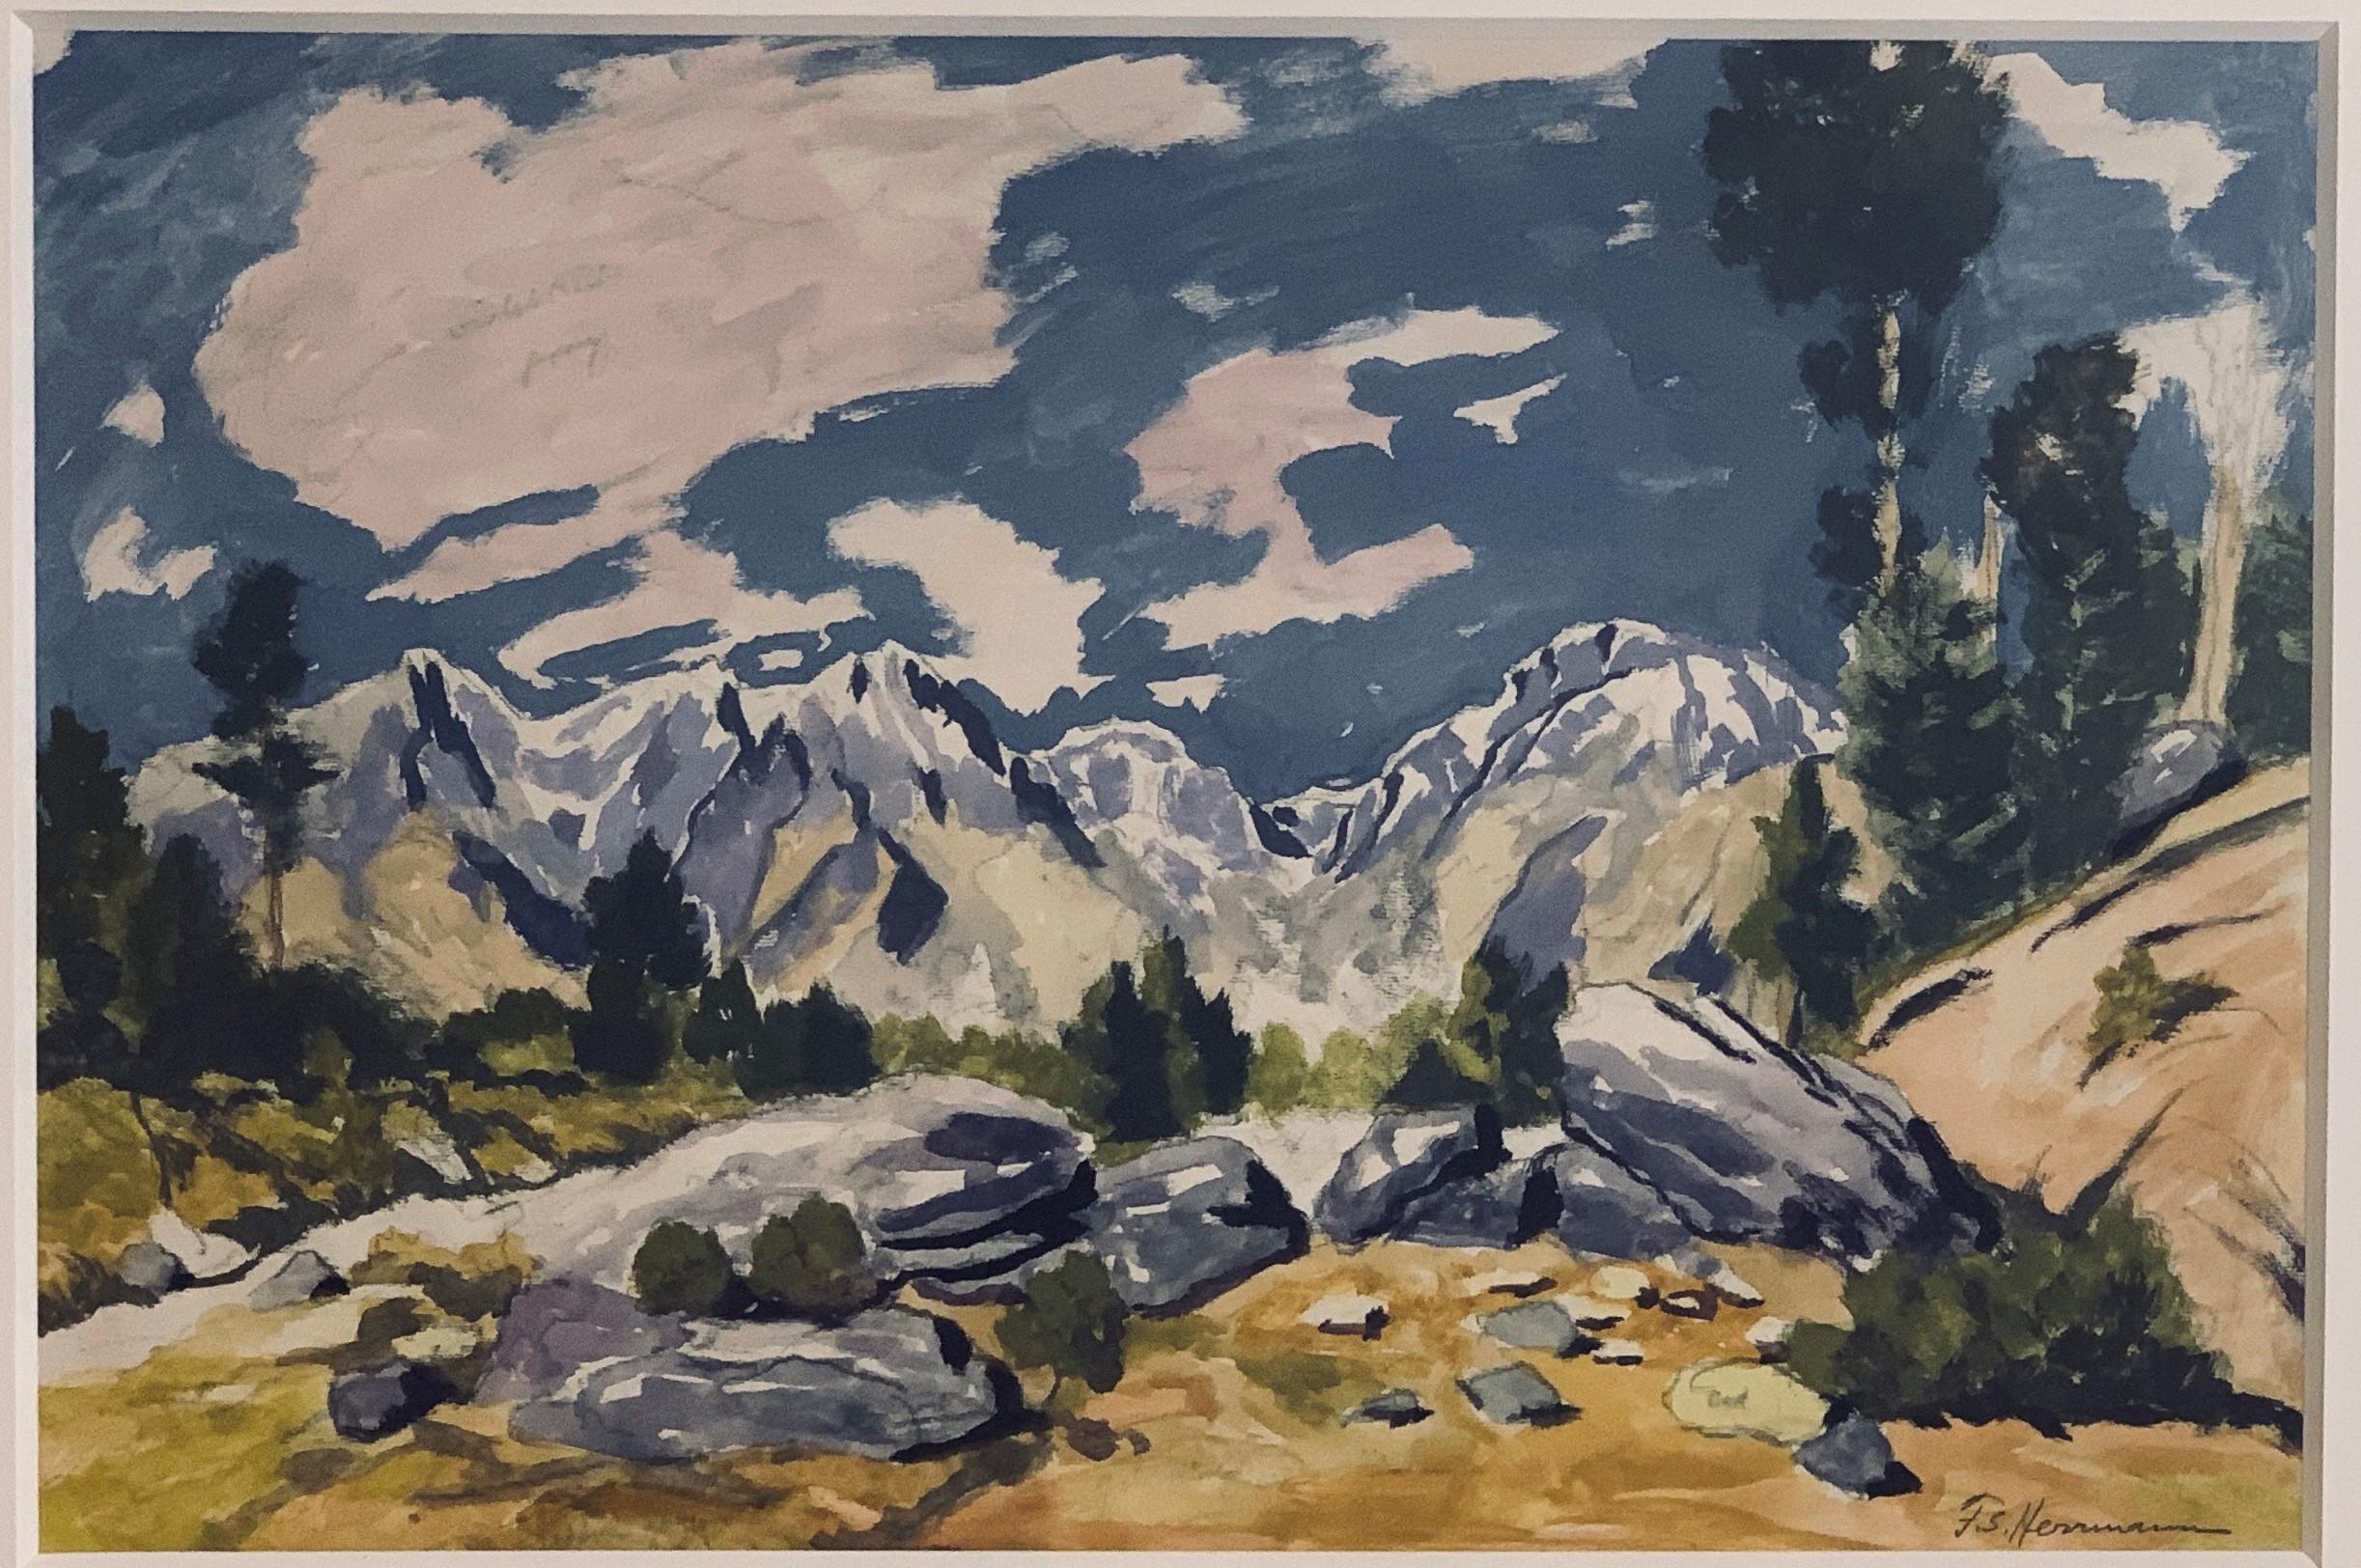 Gouache on Paper signed lower. Net image size is 12" x 17" and matted it measures 18.5" x 24"
Biography: An American who was best known in Germany where he spent most of his career, Frank Herrmann created work that embraced Beaux-Arts Academic